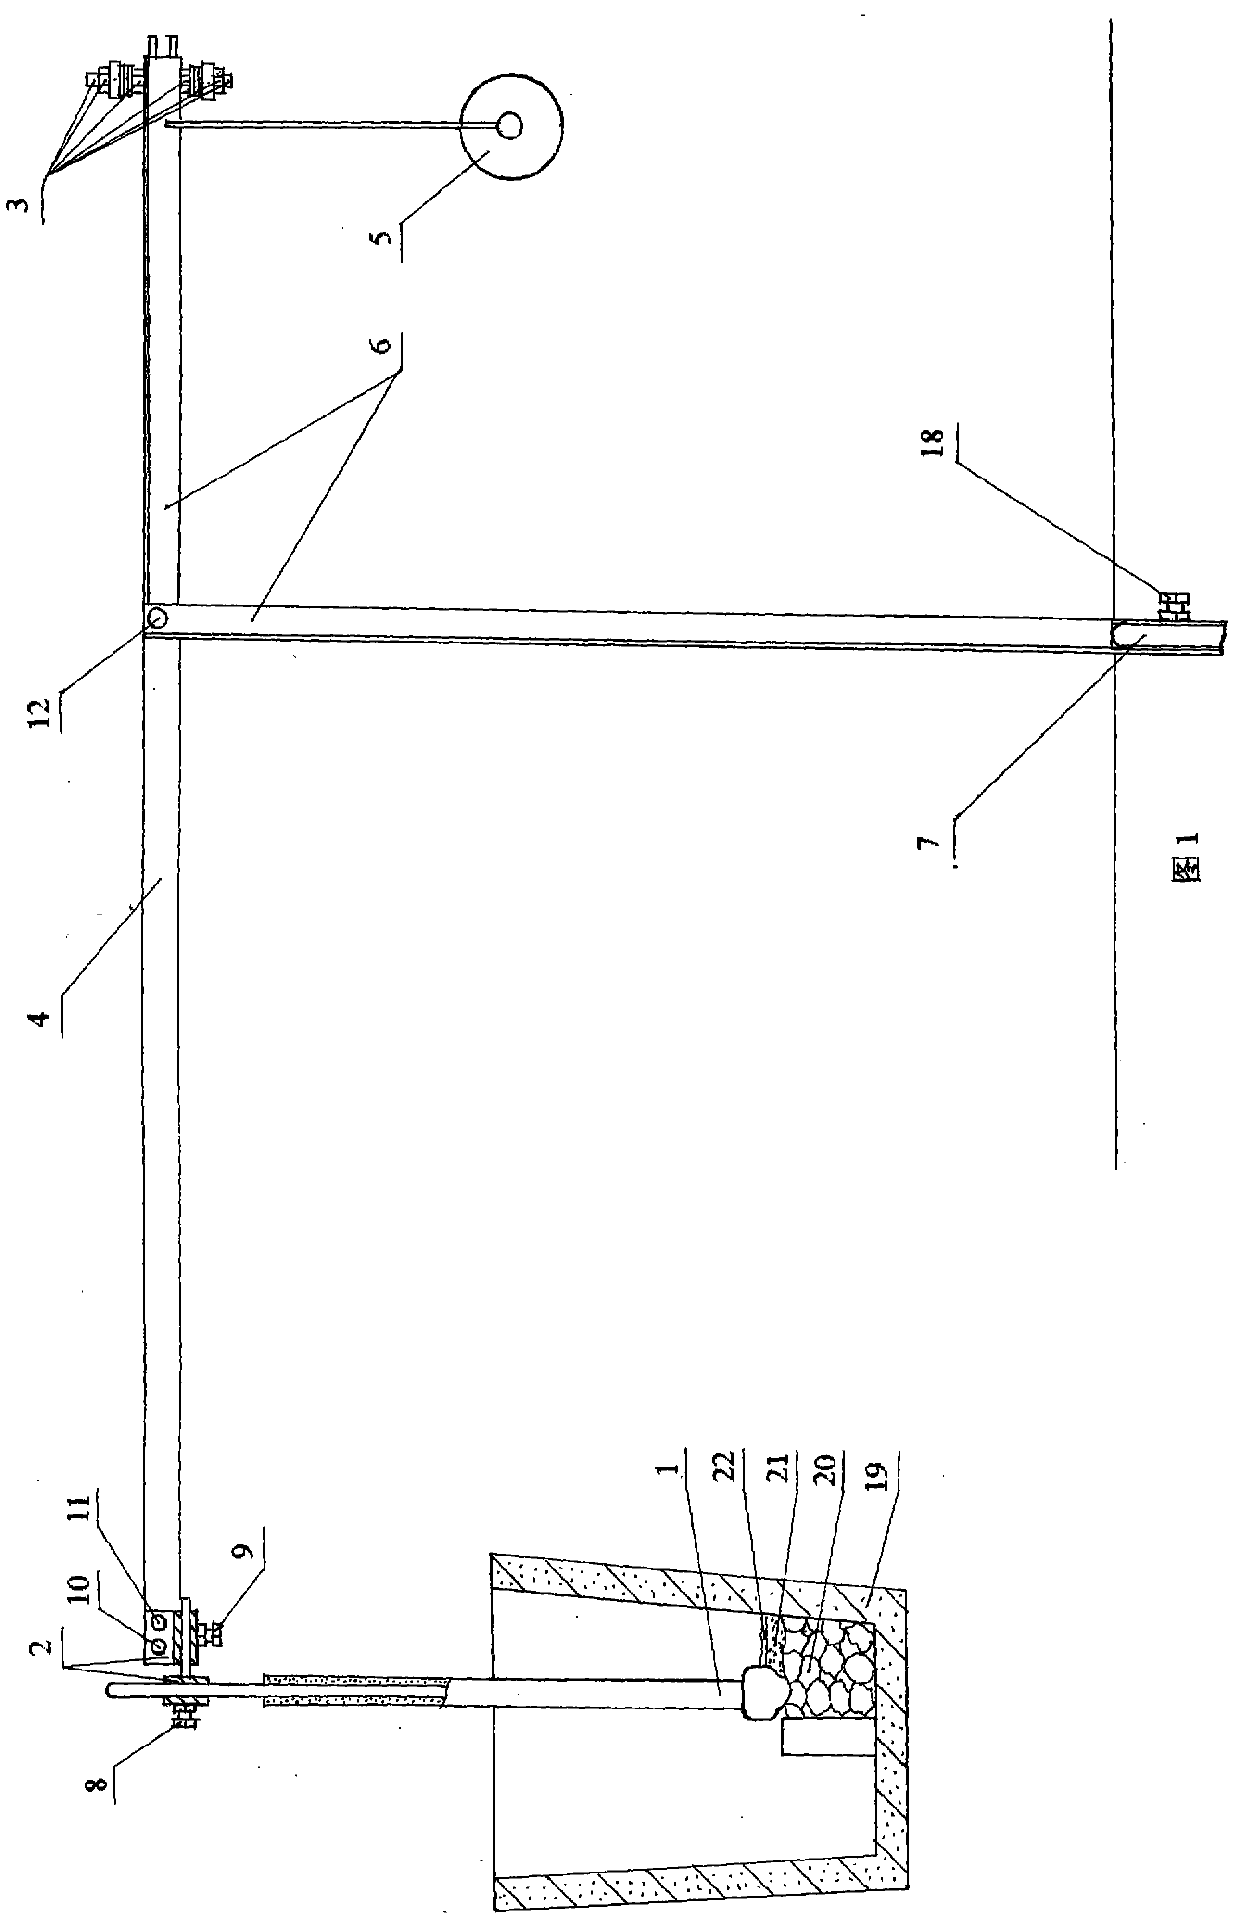 Spheroidizing treater and process